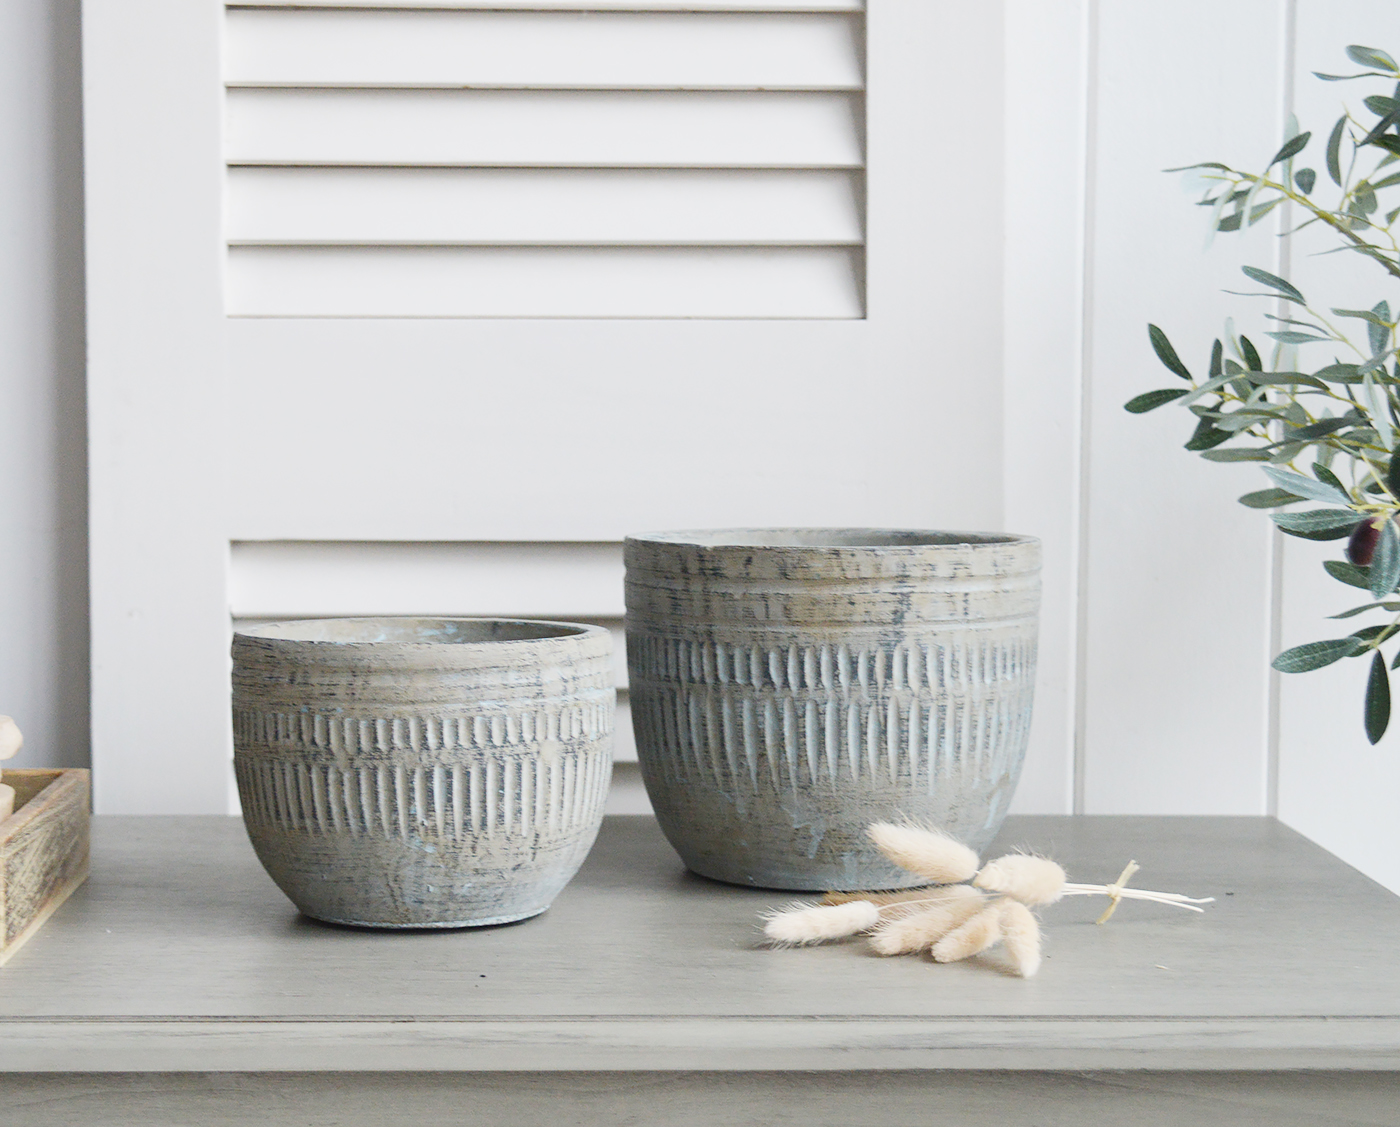 Wickford Antiqued Blue Grey Cement Pots Planters - New England Style Interiors. Home decor and accessories for console table, shelf and coffee table styling and to complement our furniture for Coastal, Country and modern farmhouse styled homes